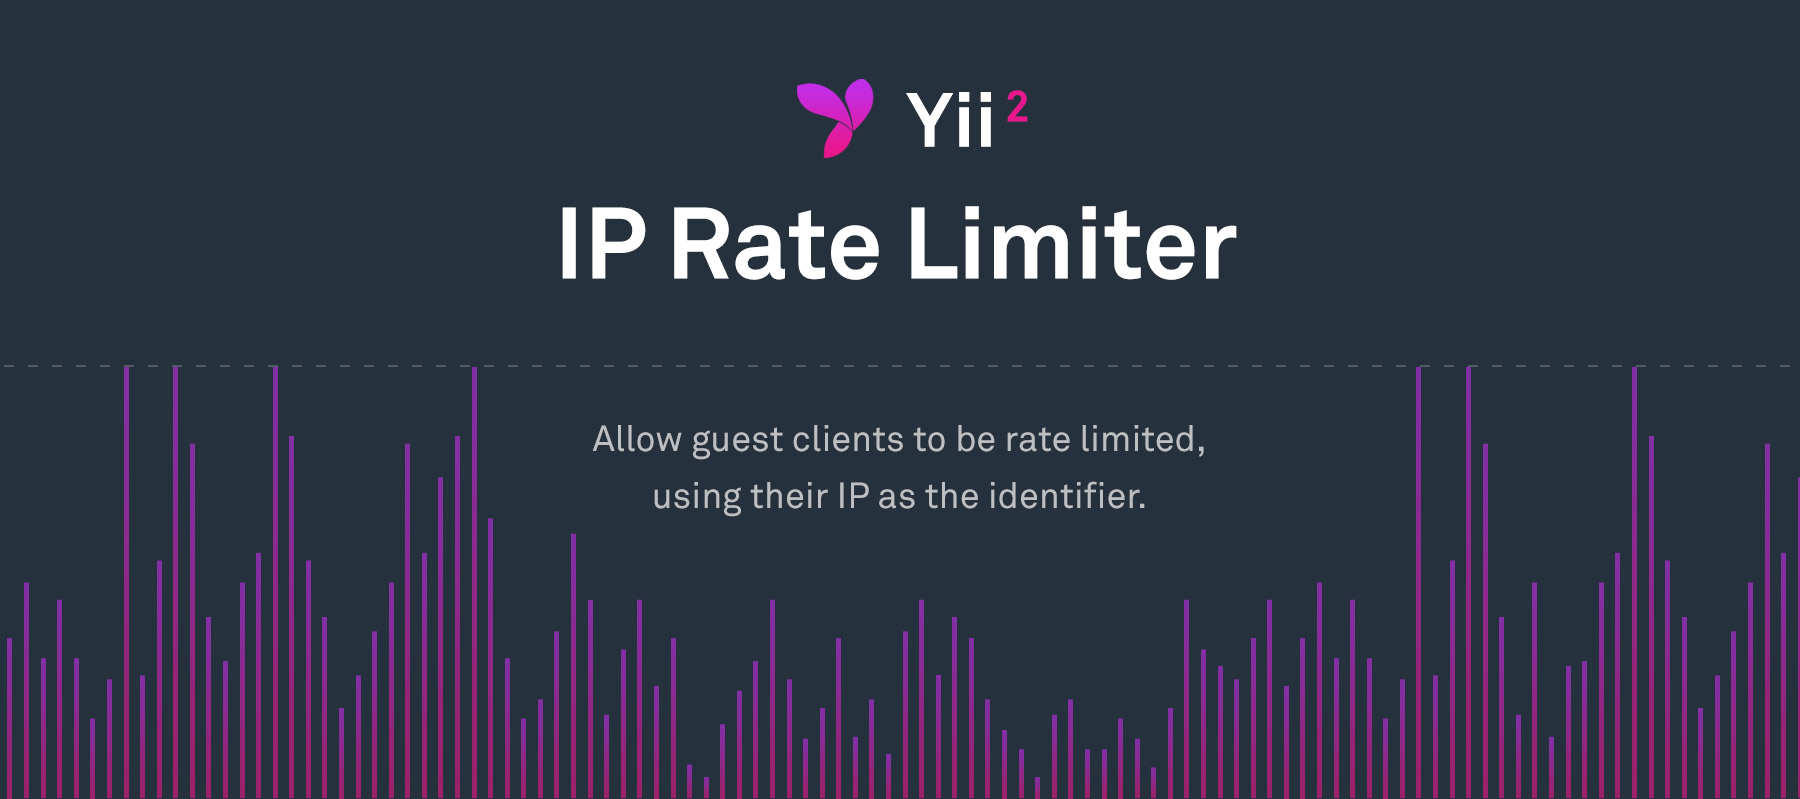 Yii2 IP Rate Limiter